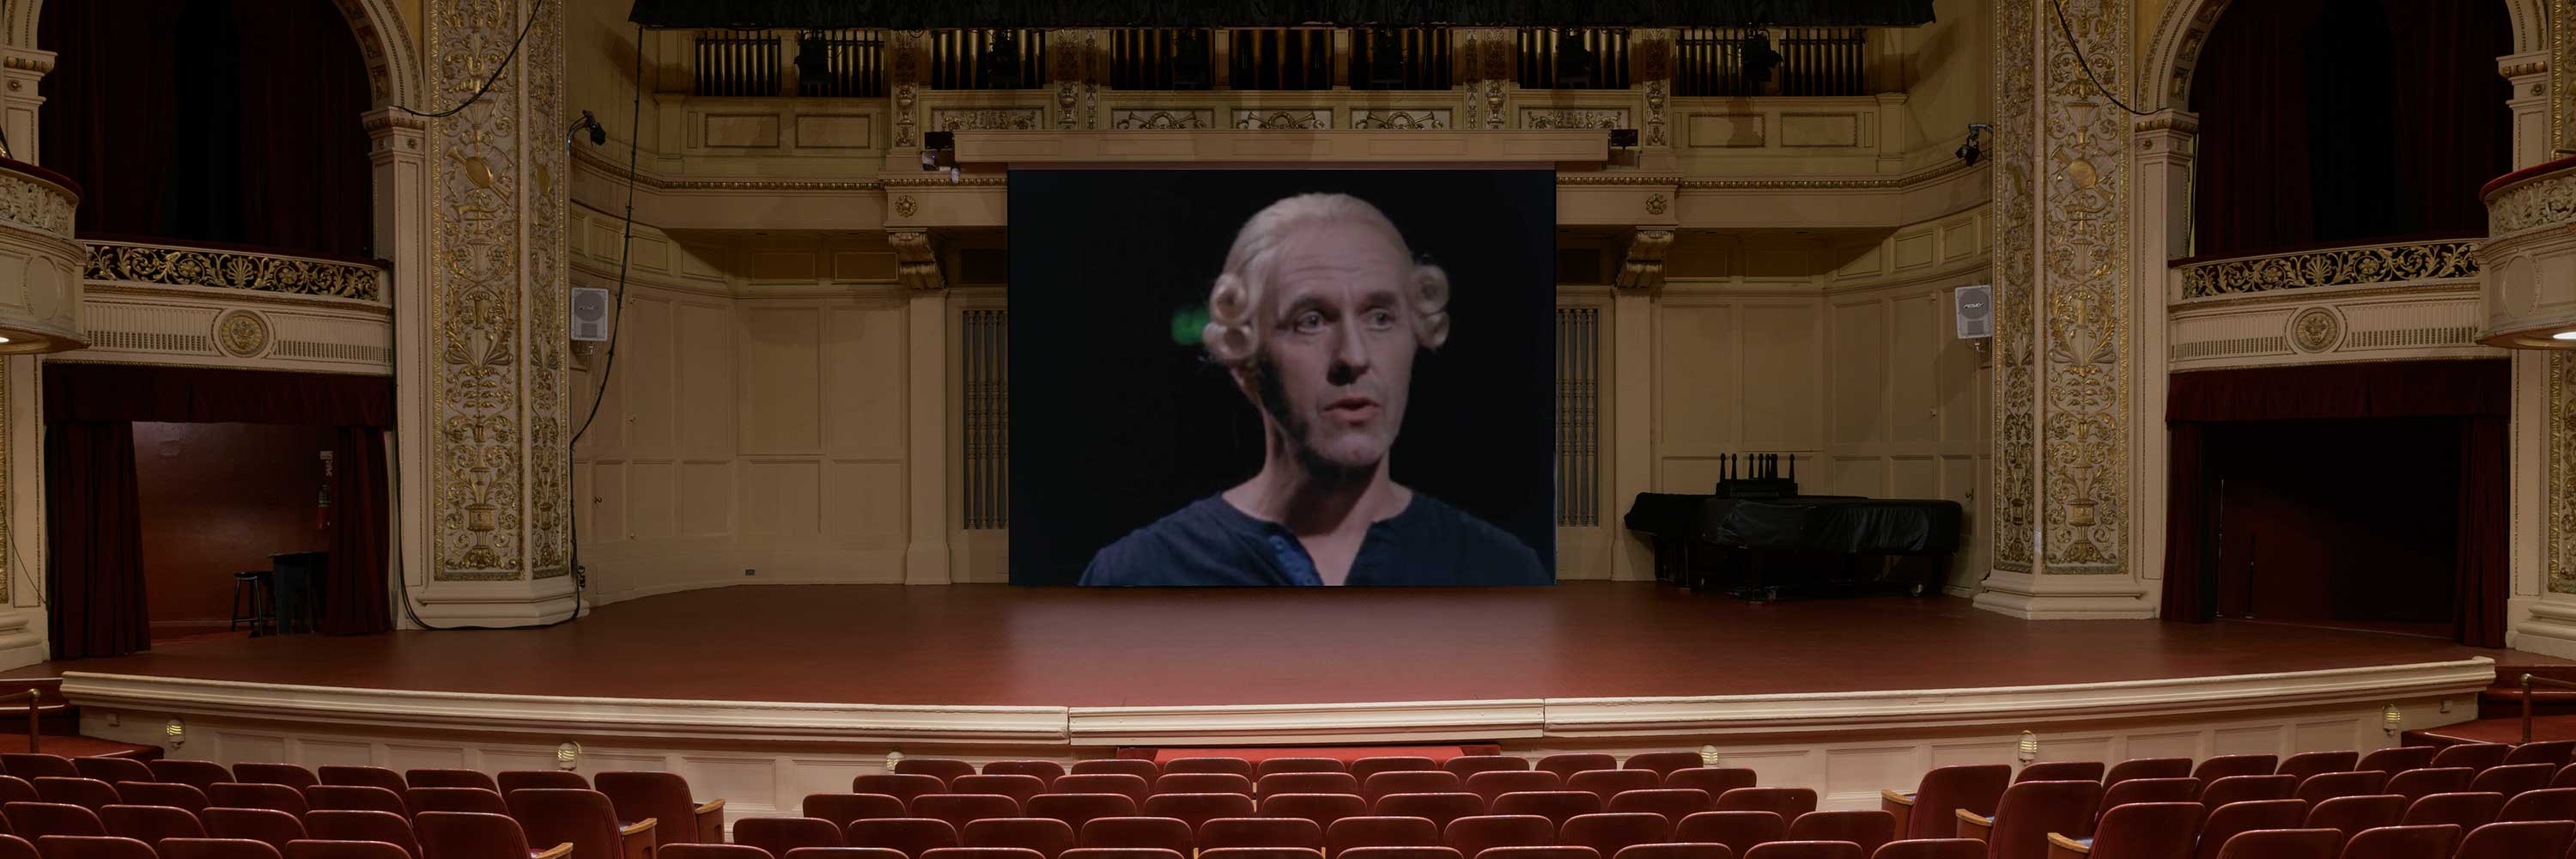 View of Carnegie Music Hall stage with projection screen of male with wig in conversation